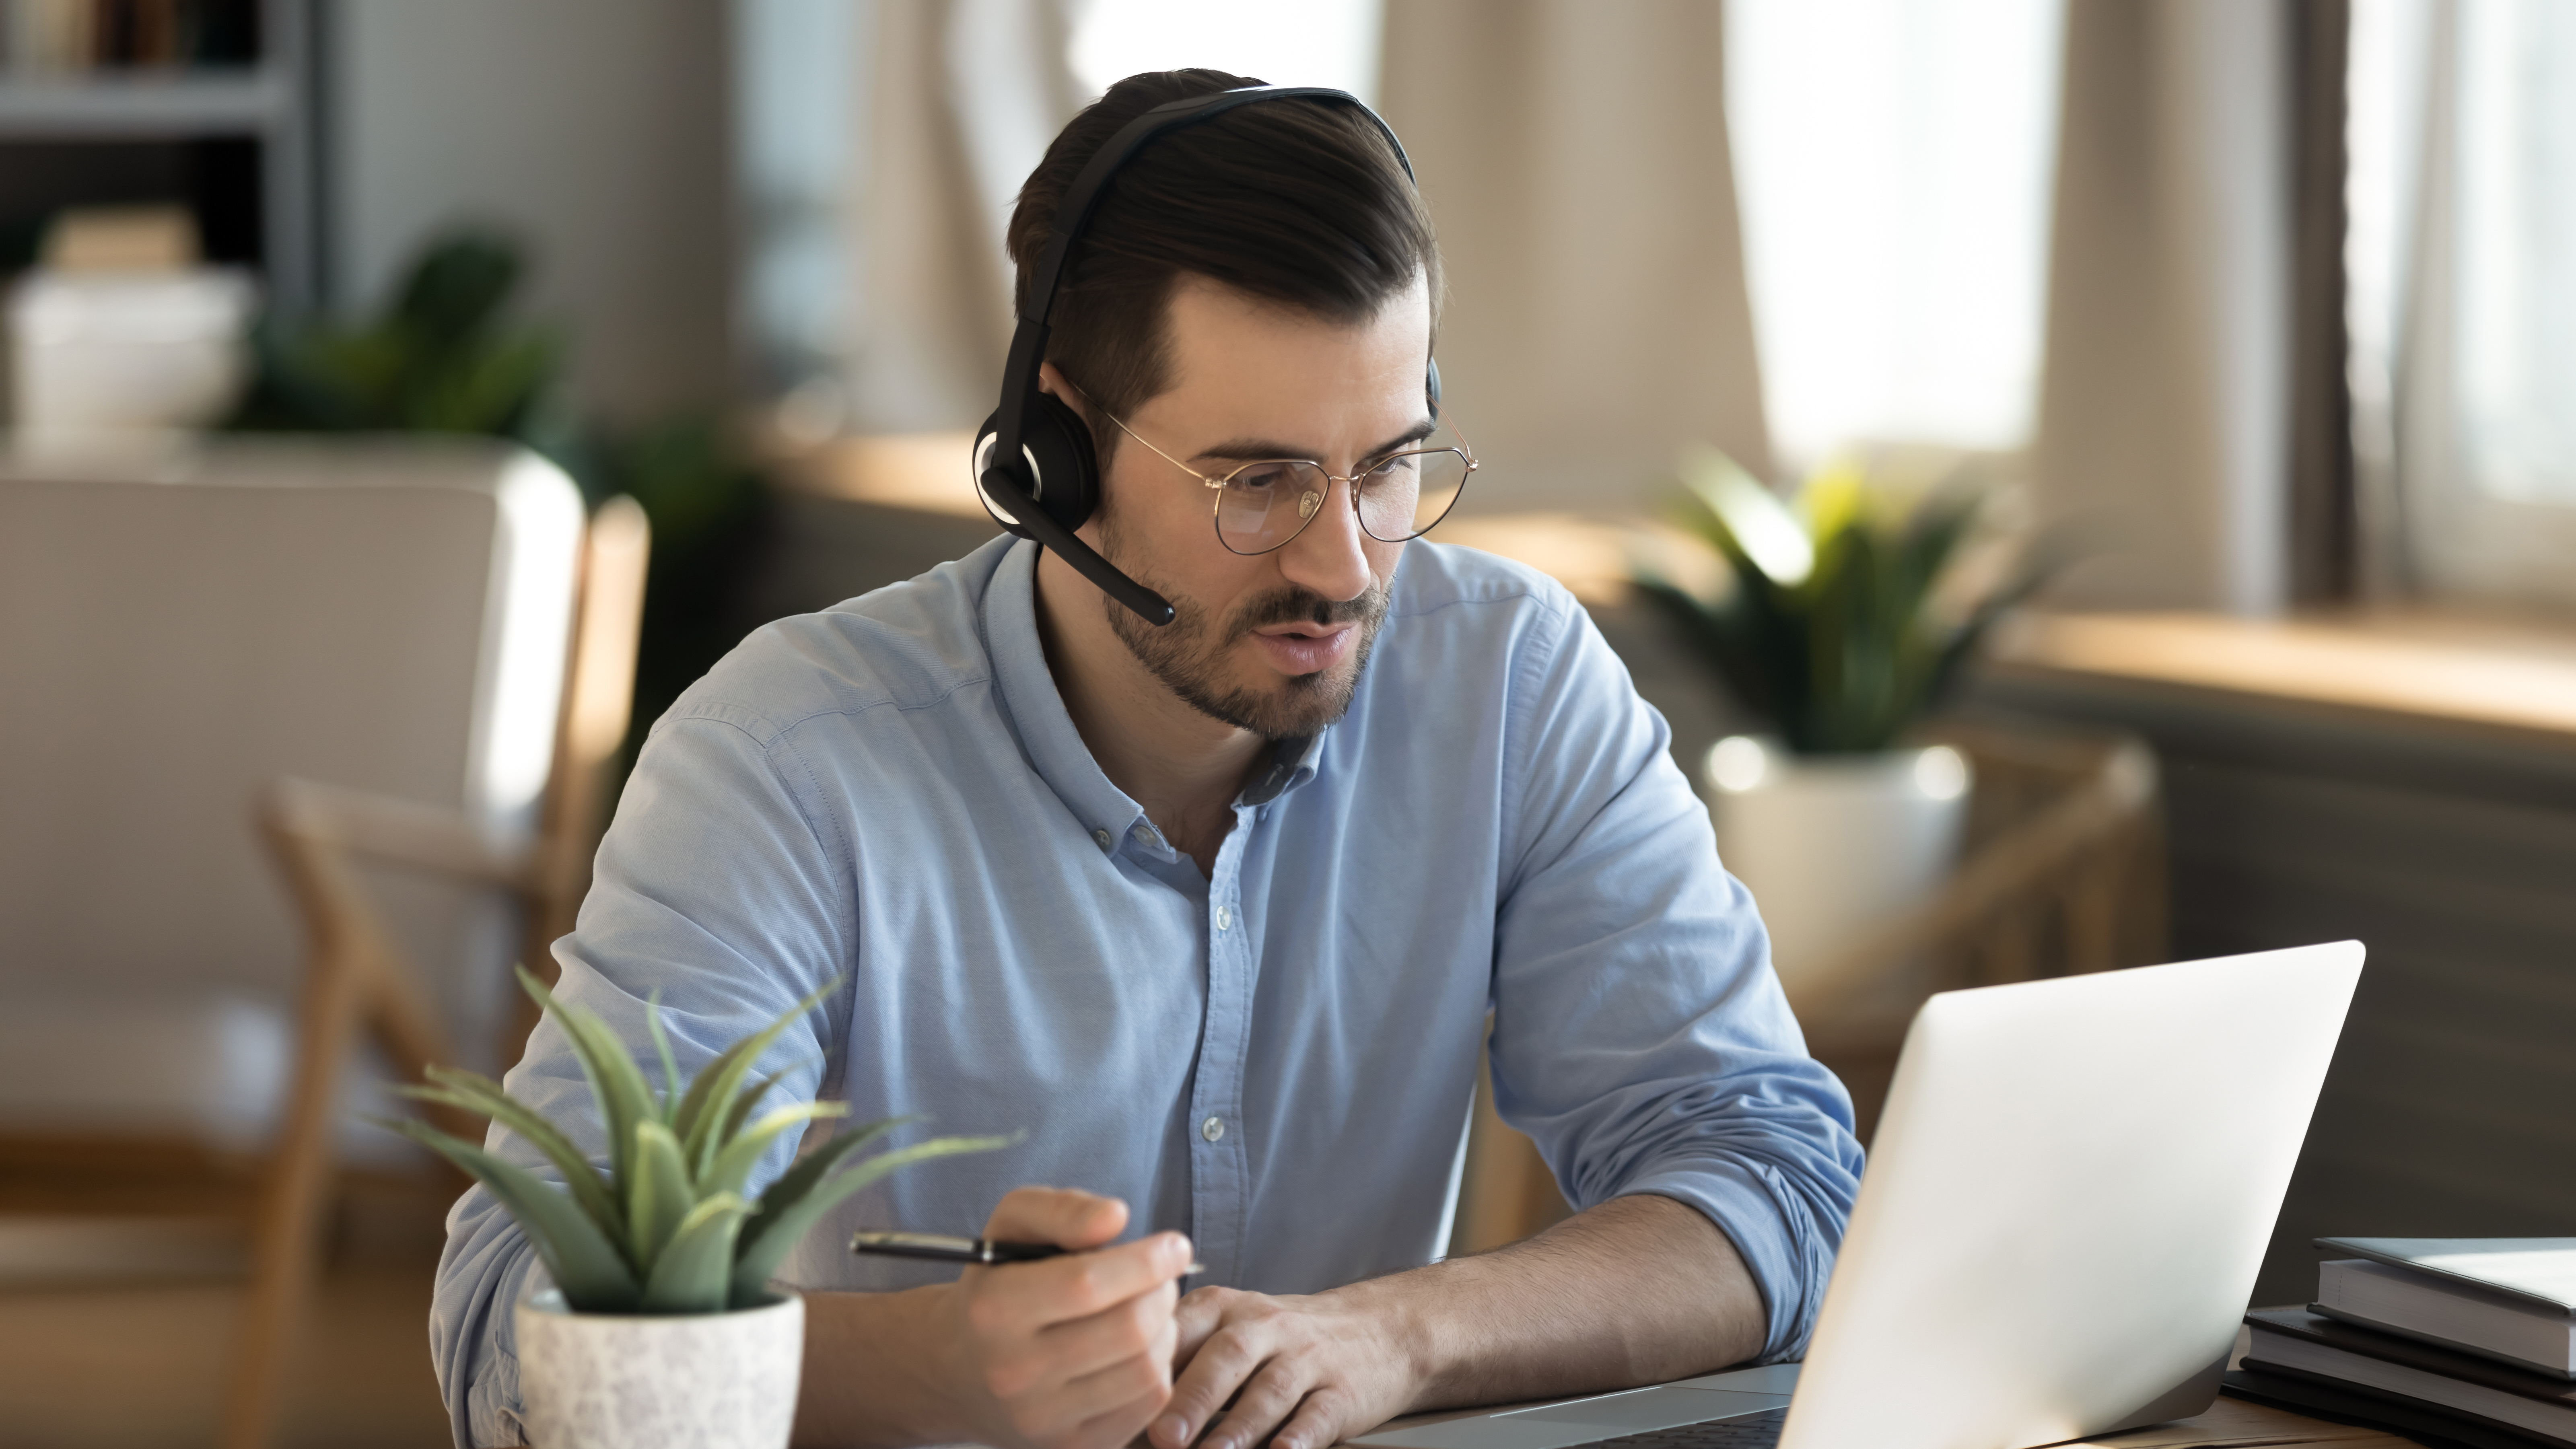 Focused man wearing headset writing notes, studying online